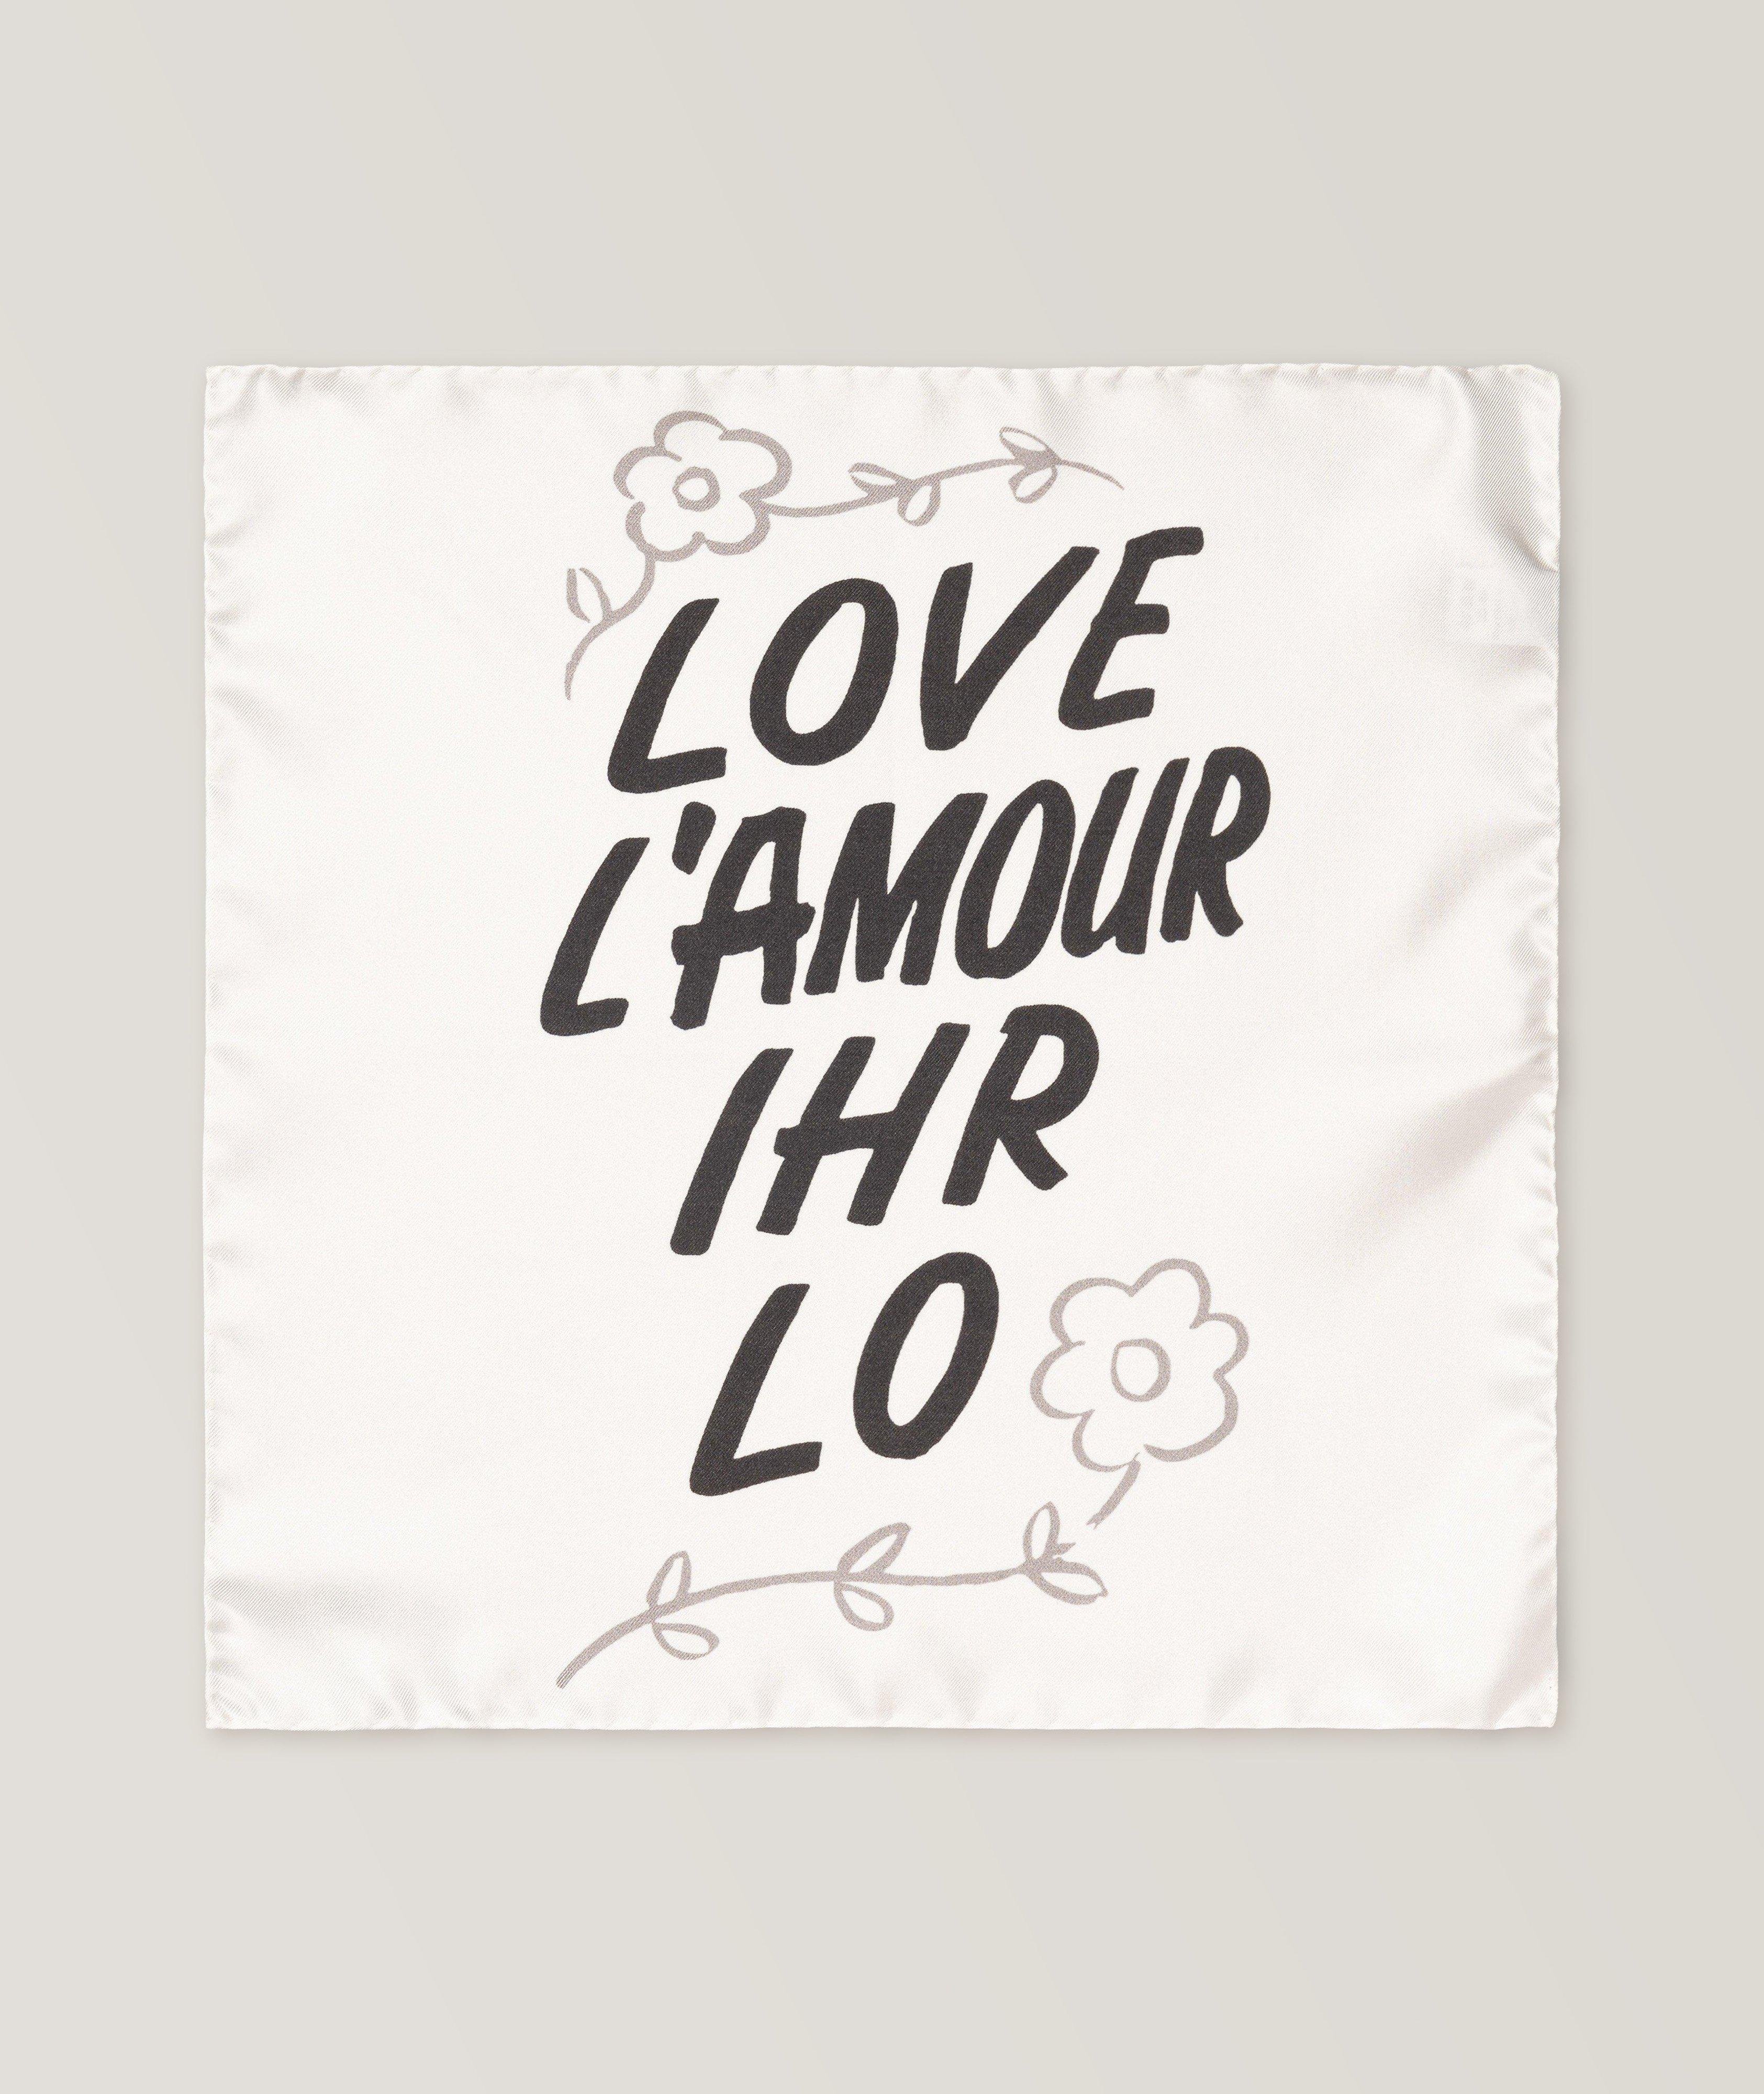 The Beatles Collection "Love L'Amour Ihr Lo" Silk Pocket Square